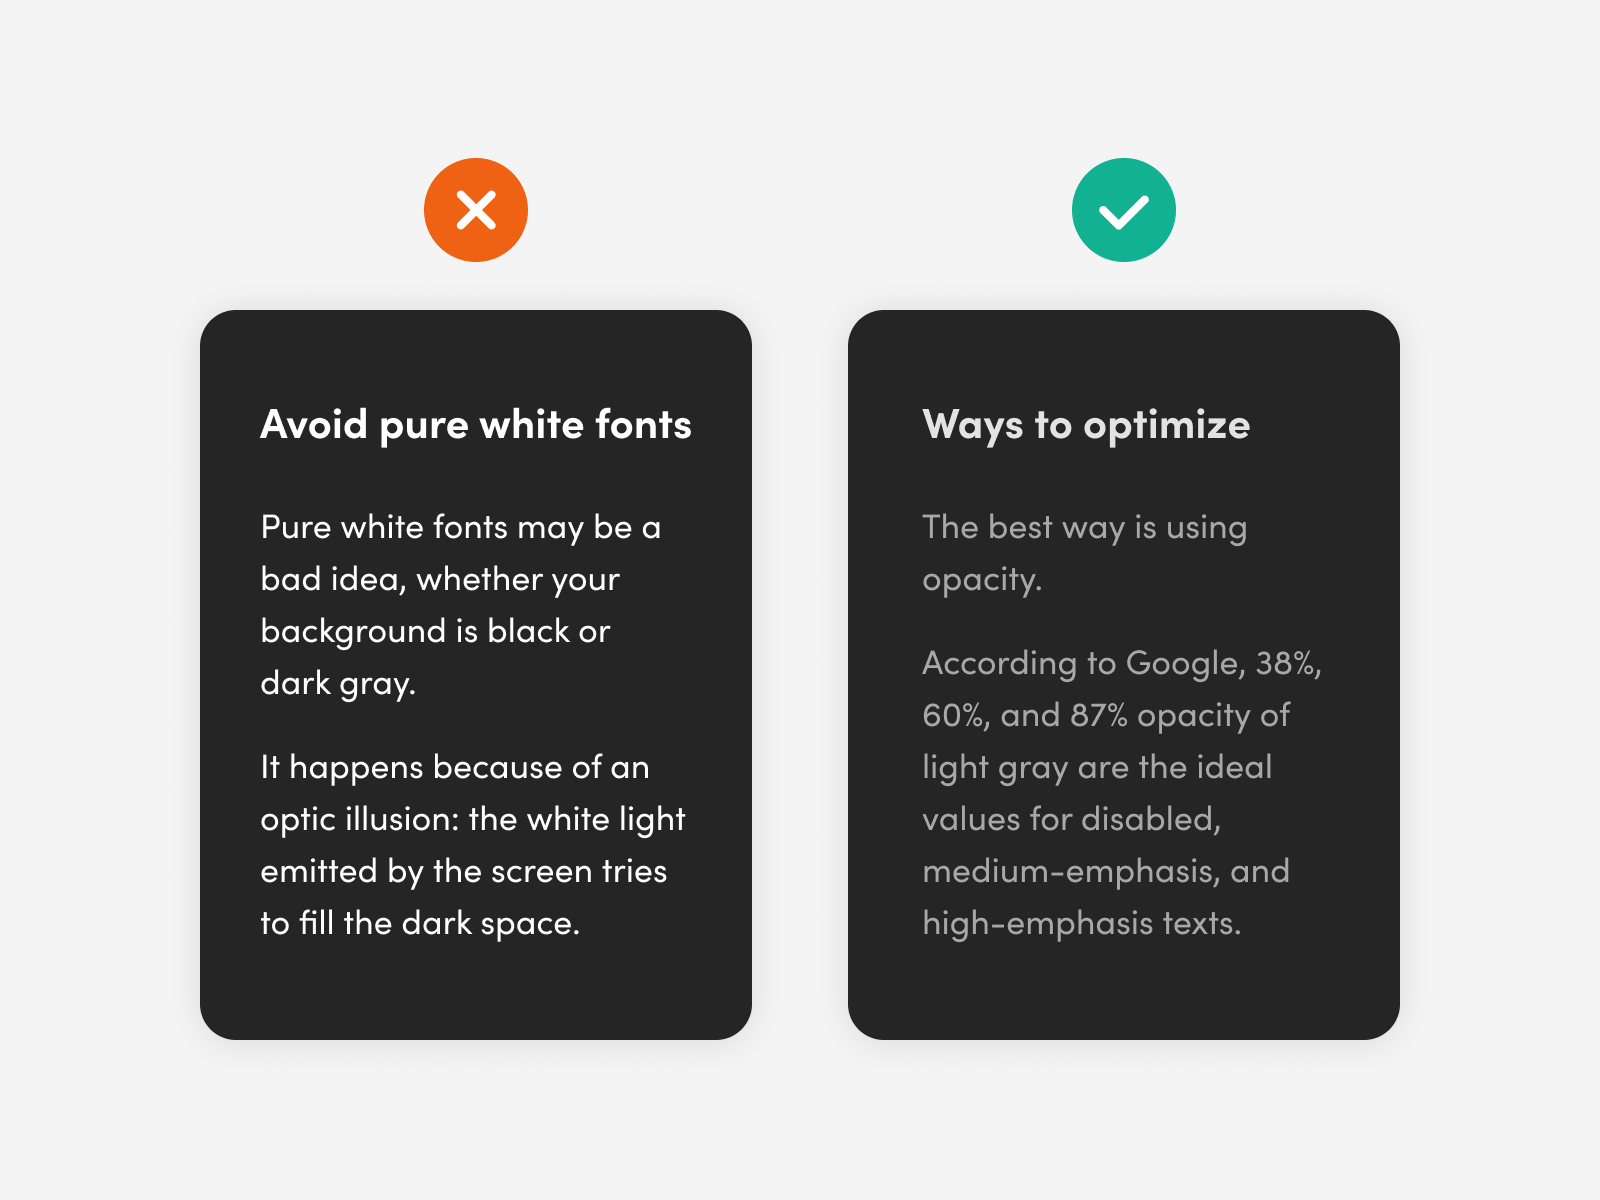 Avoid pure white fonts